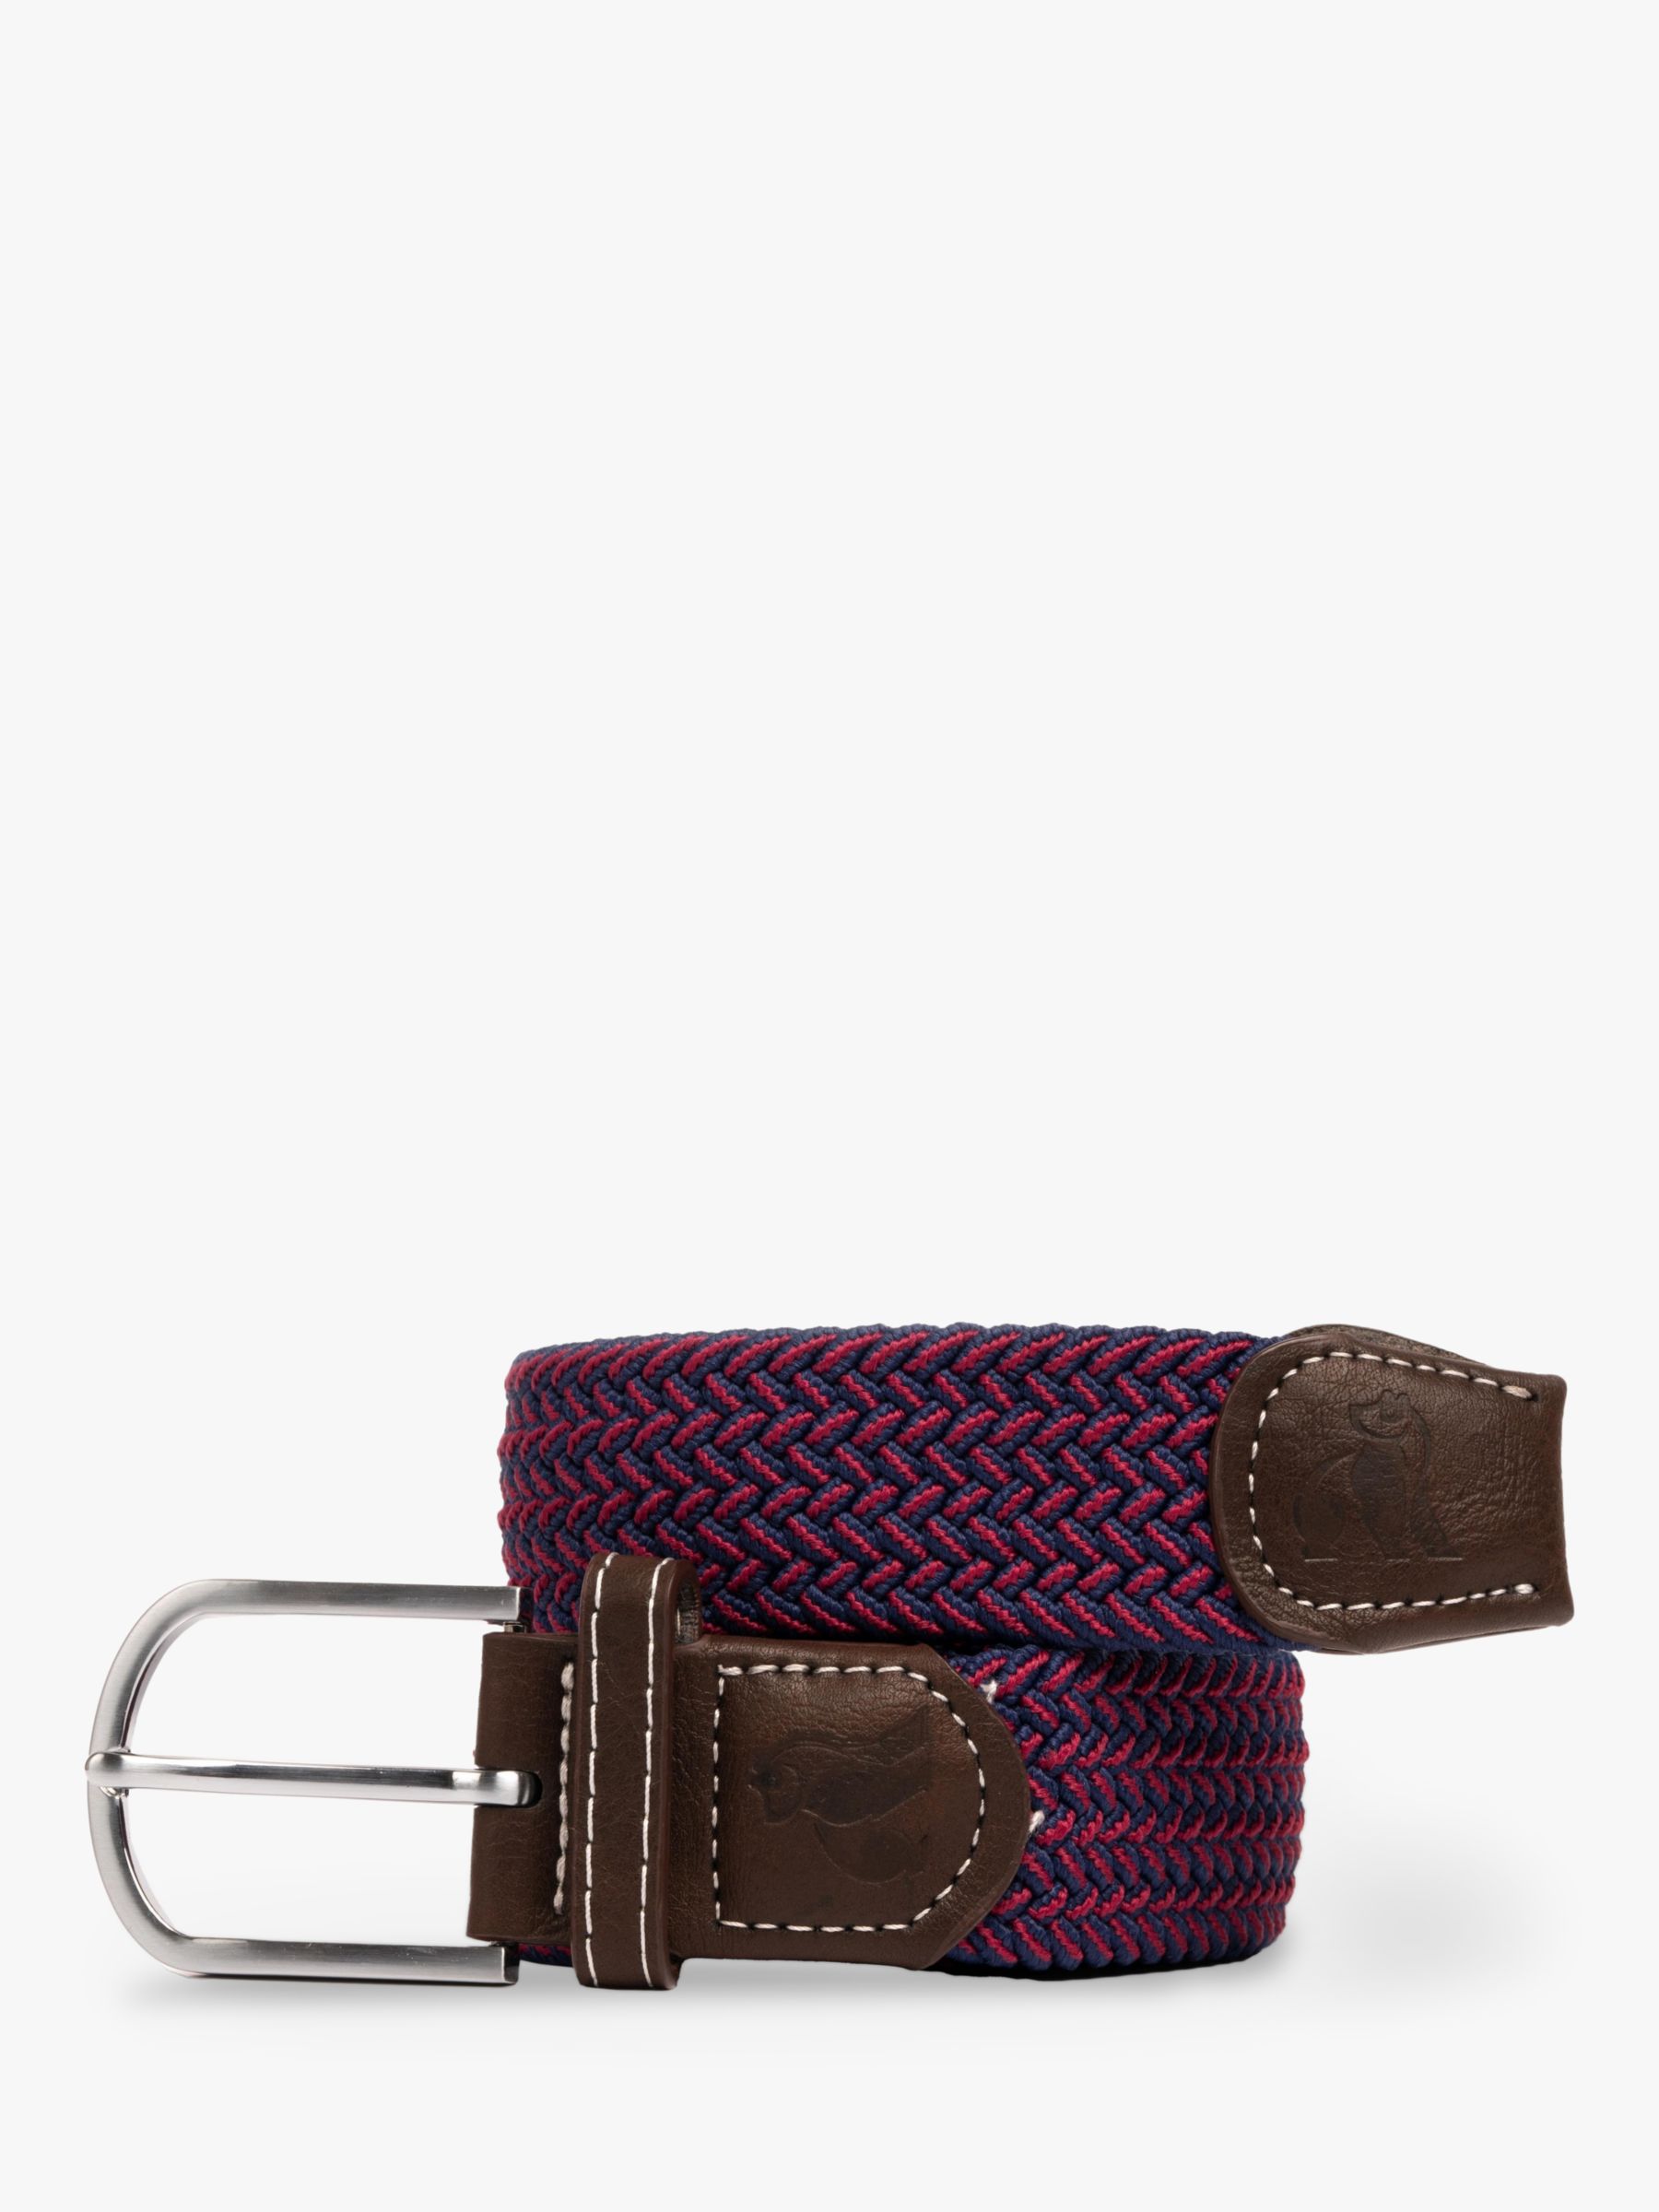 Swole Panda ZigZag Recycled Woven Belt, Blue/Red at John Lewis & Partners